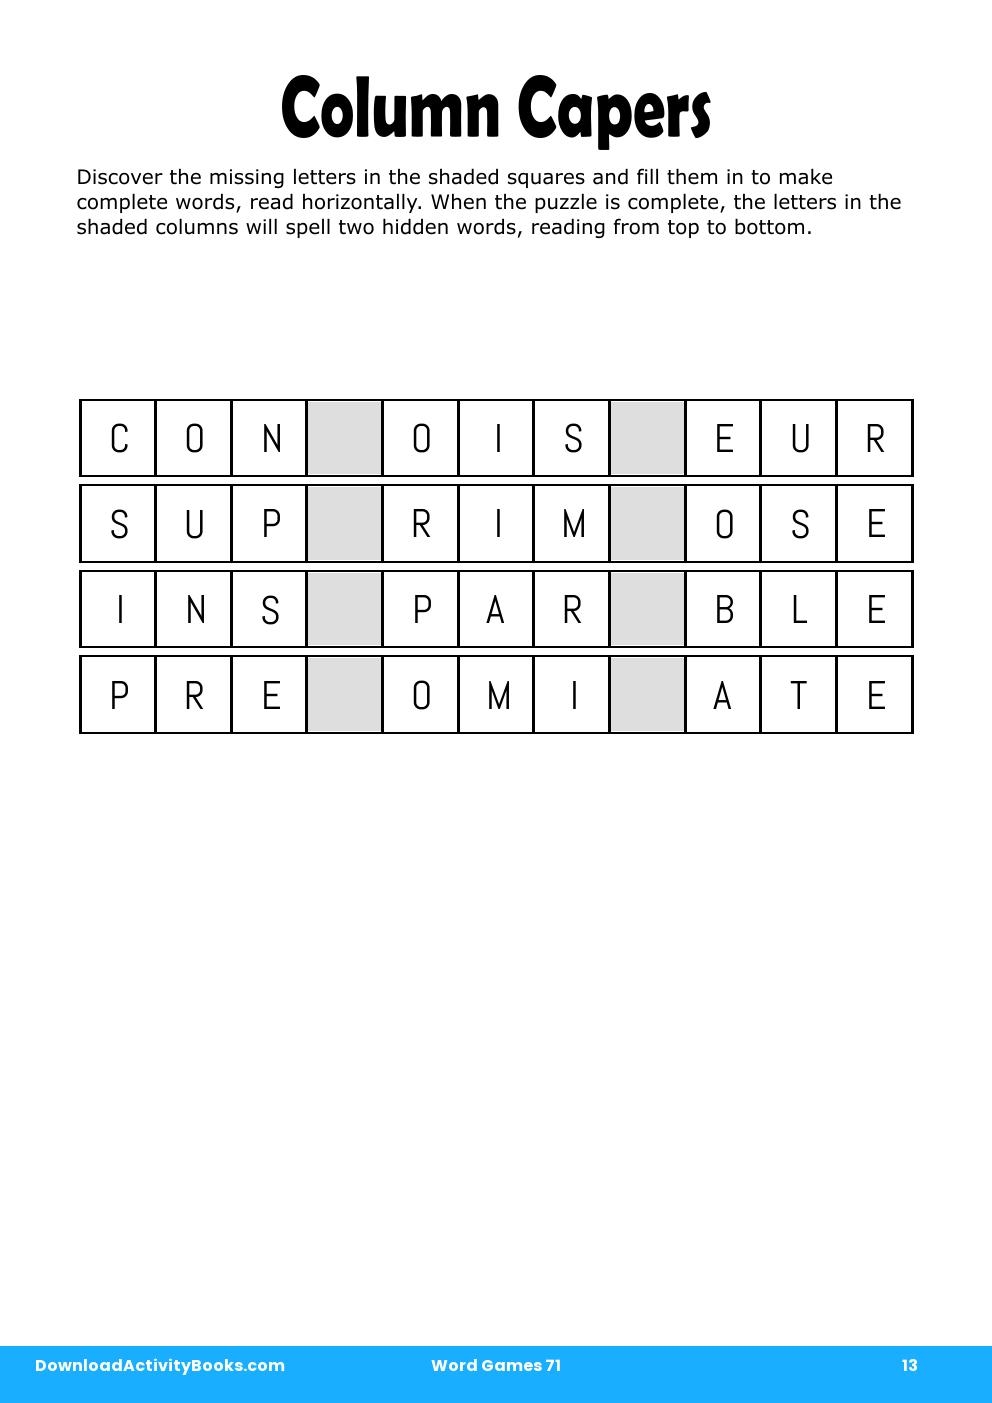 Column Capers in Word Games 71